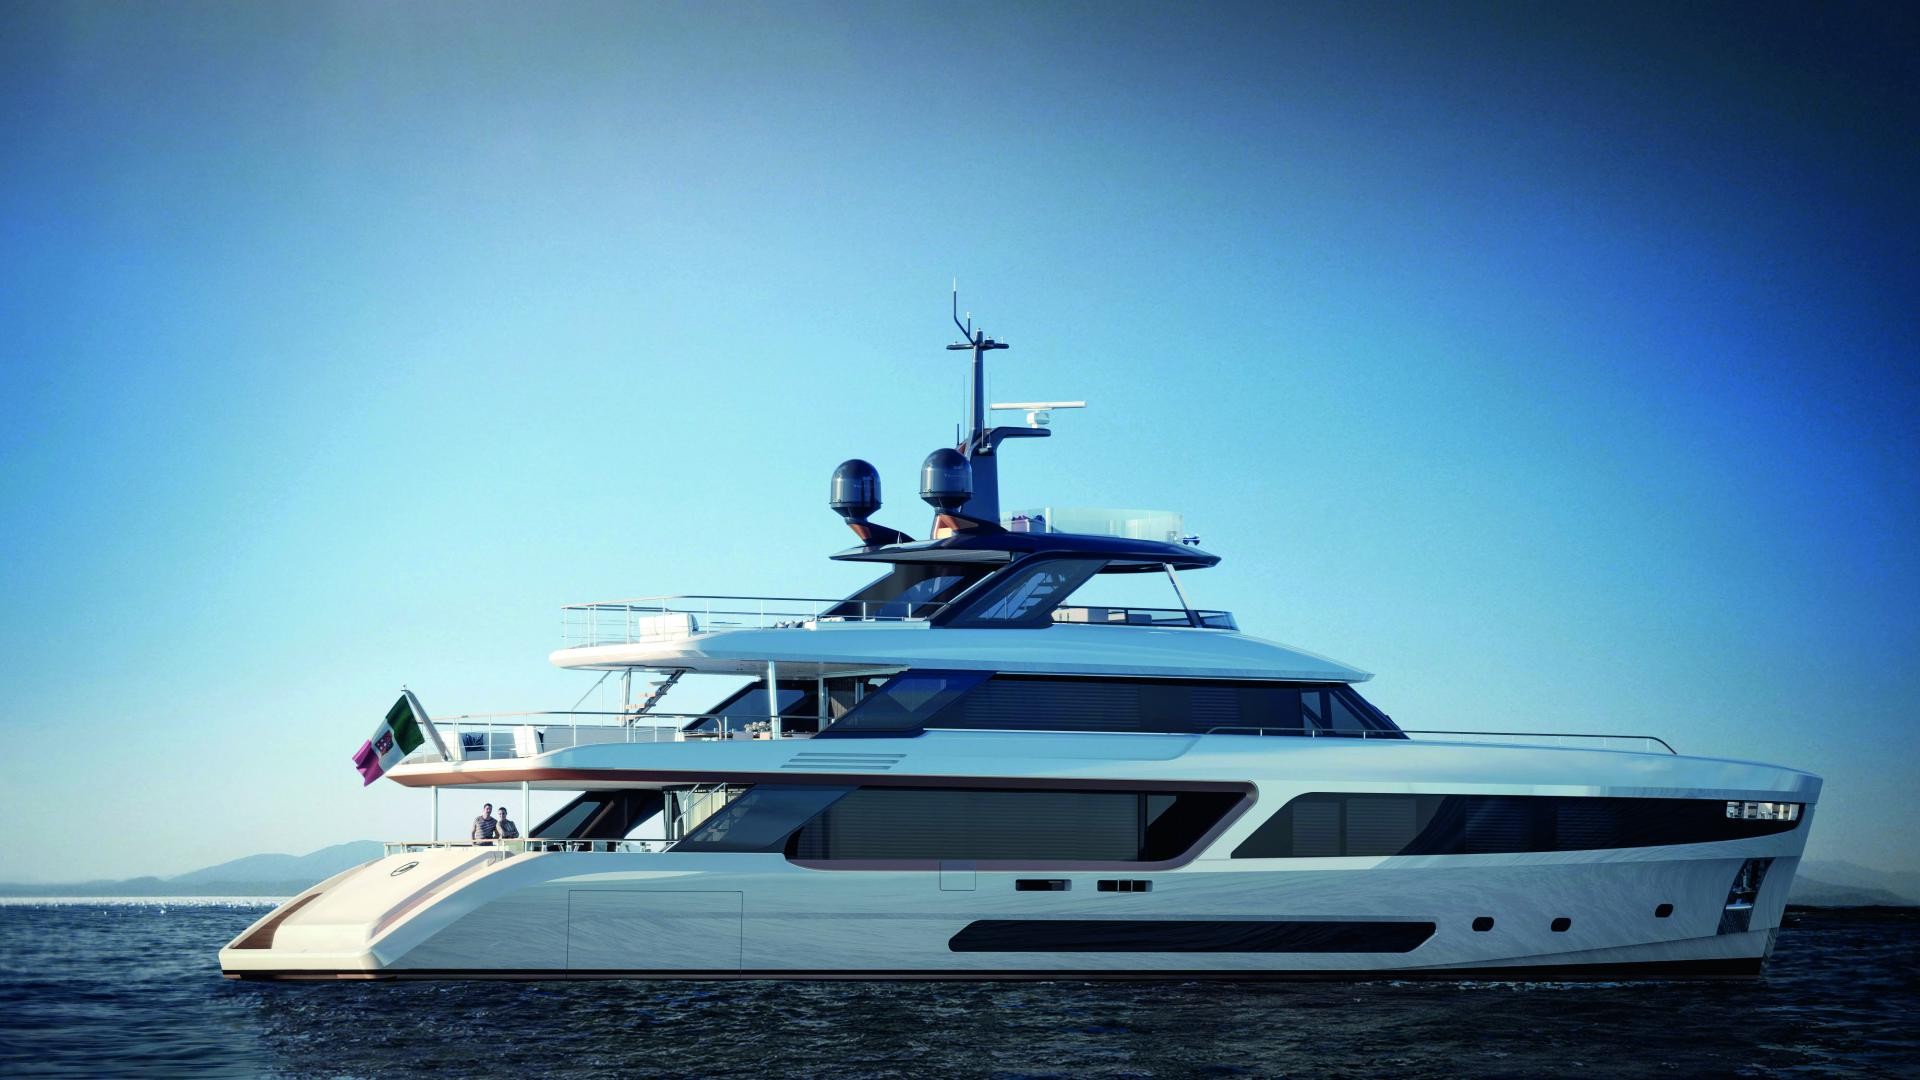 Benetti at the Cannes Yachting Festival, with the Motopanfilo 37m